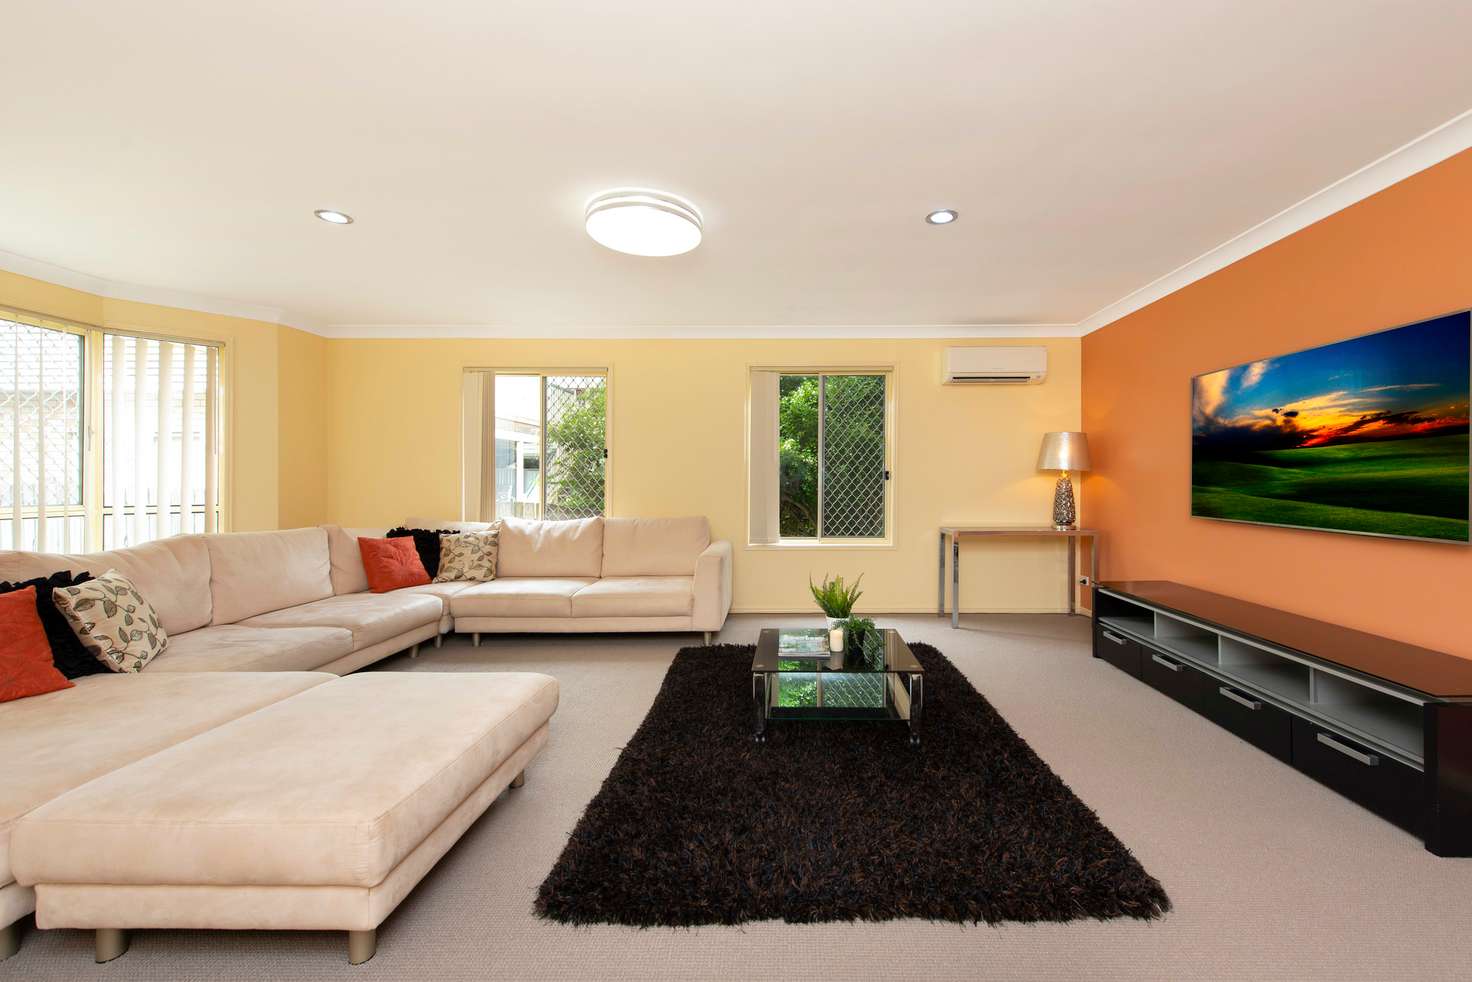 Main view of Homely house listing, 173 Oates Ave, Holland Park QLD 4121